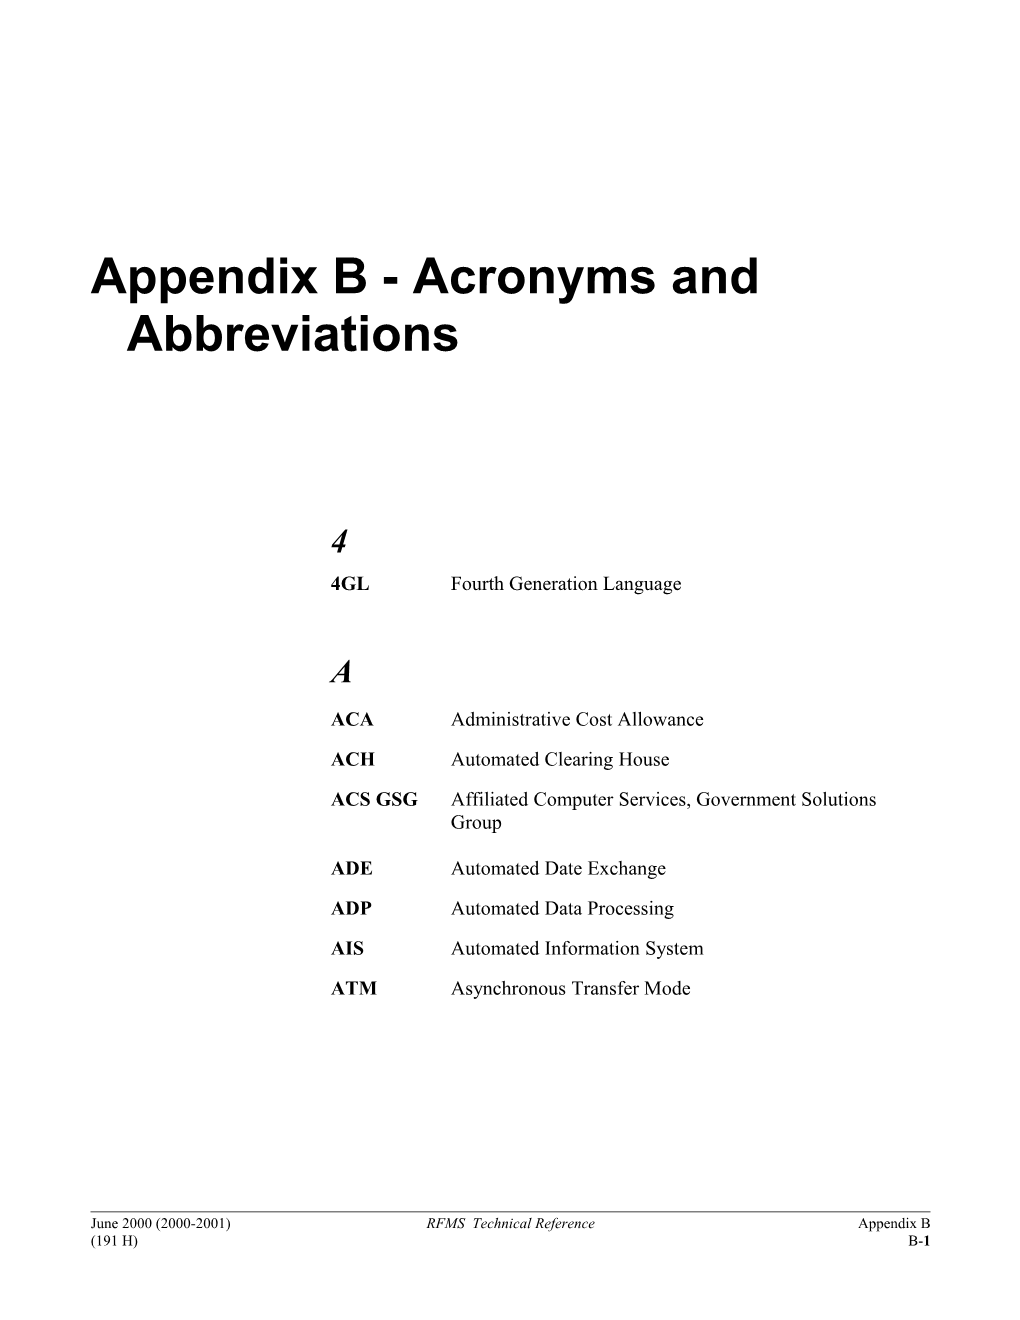 Appendix B - Acronyms and Abbreviations